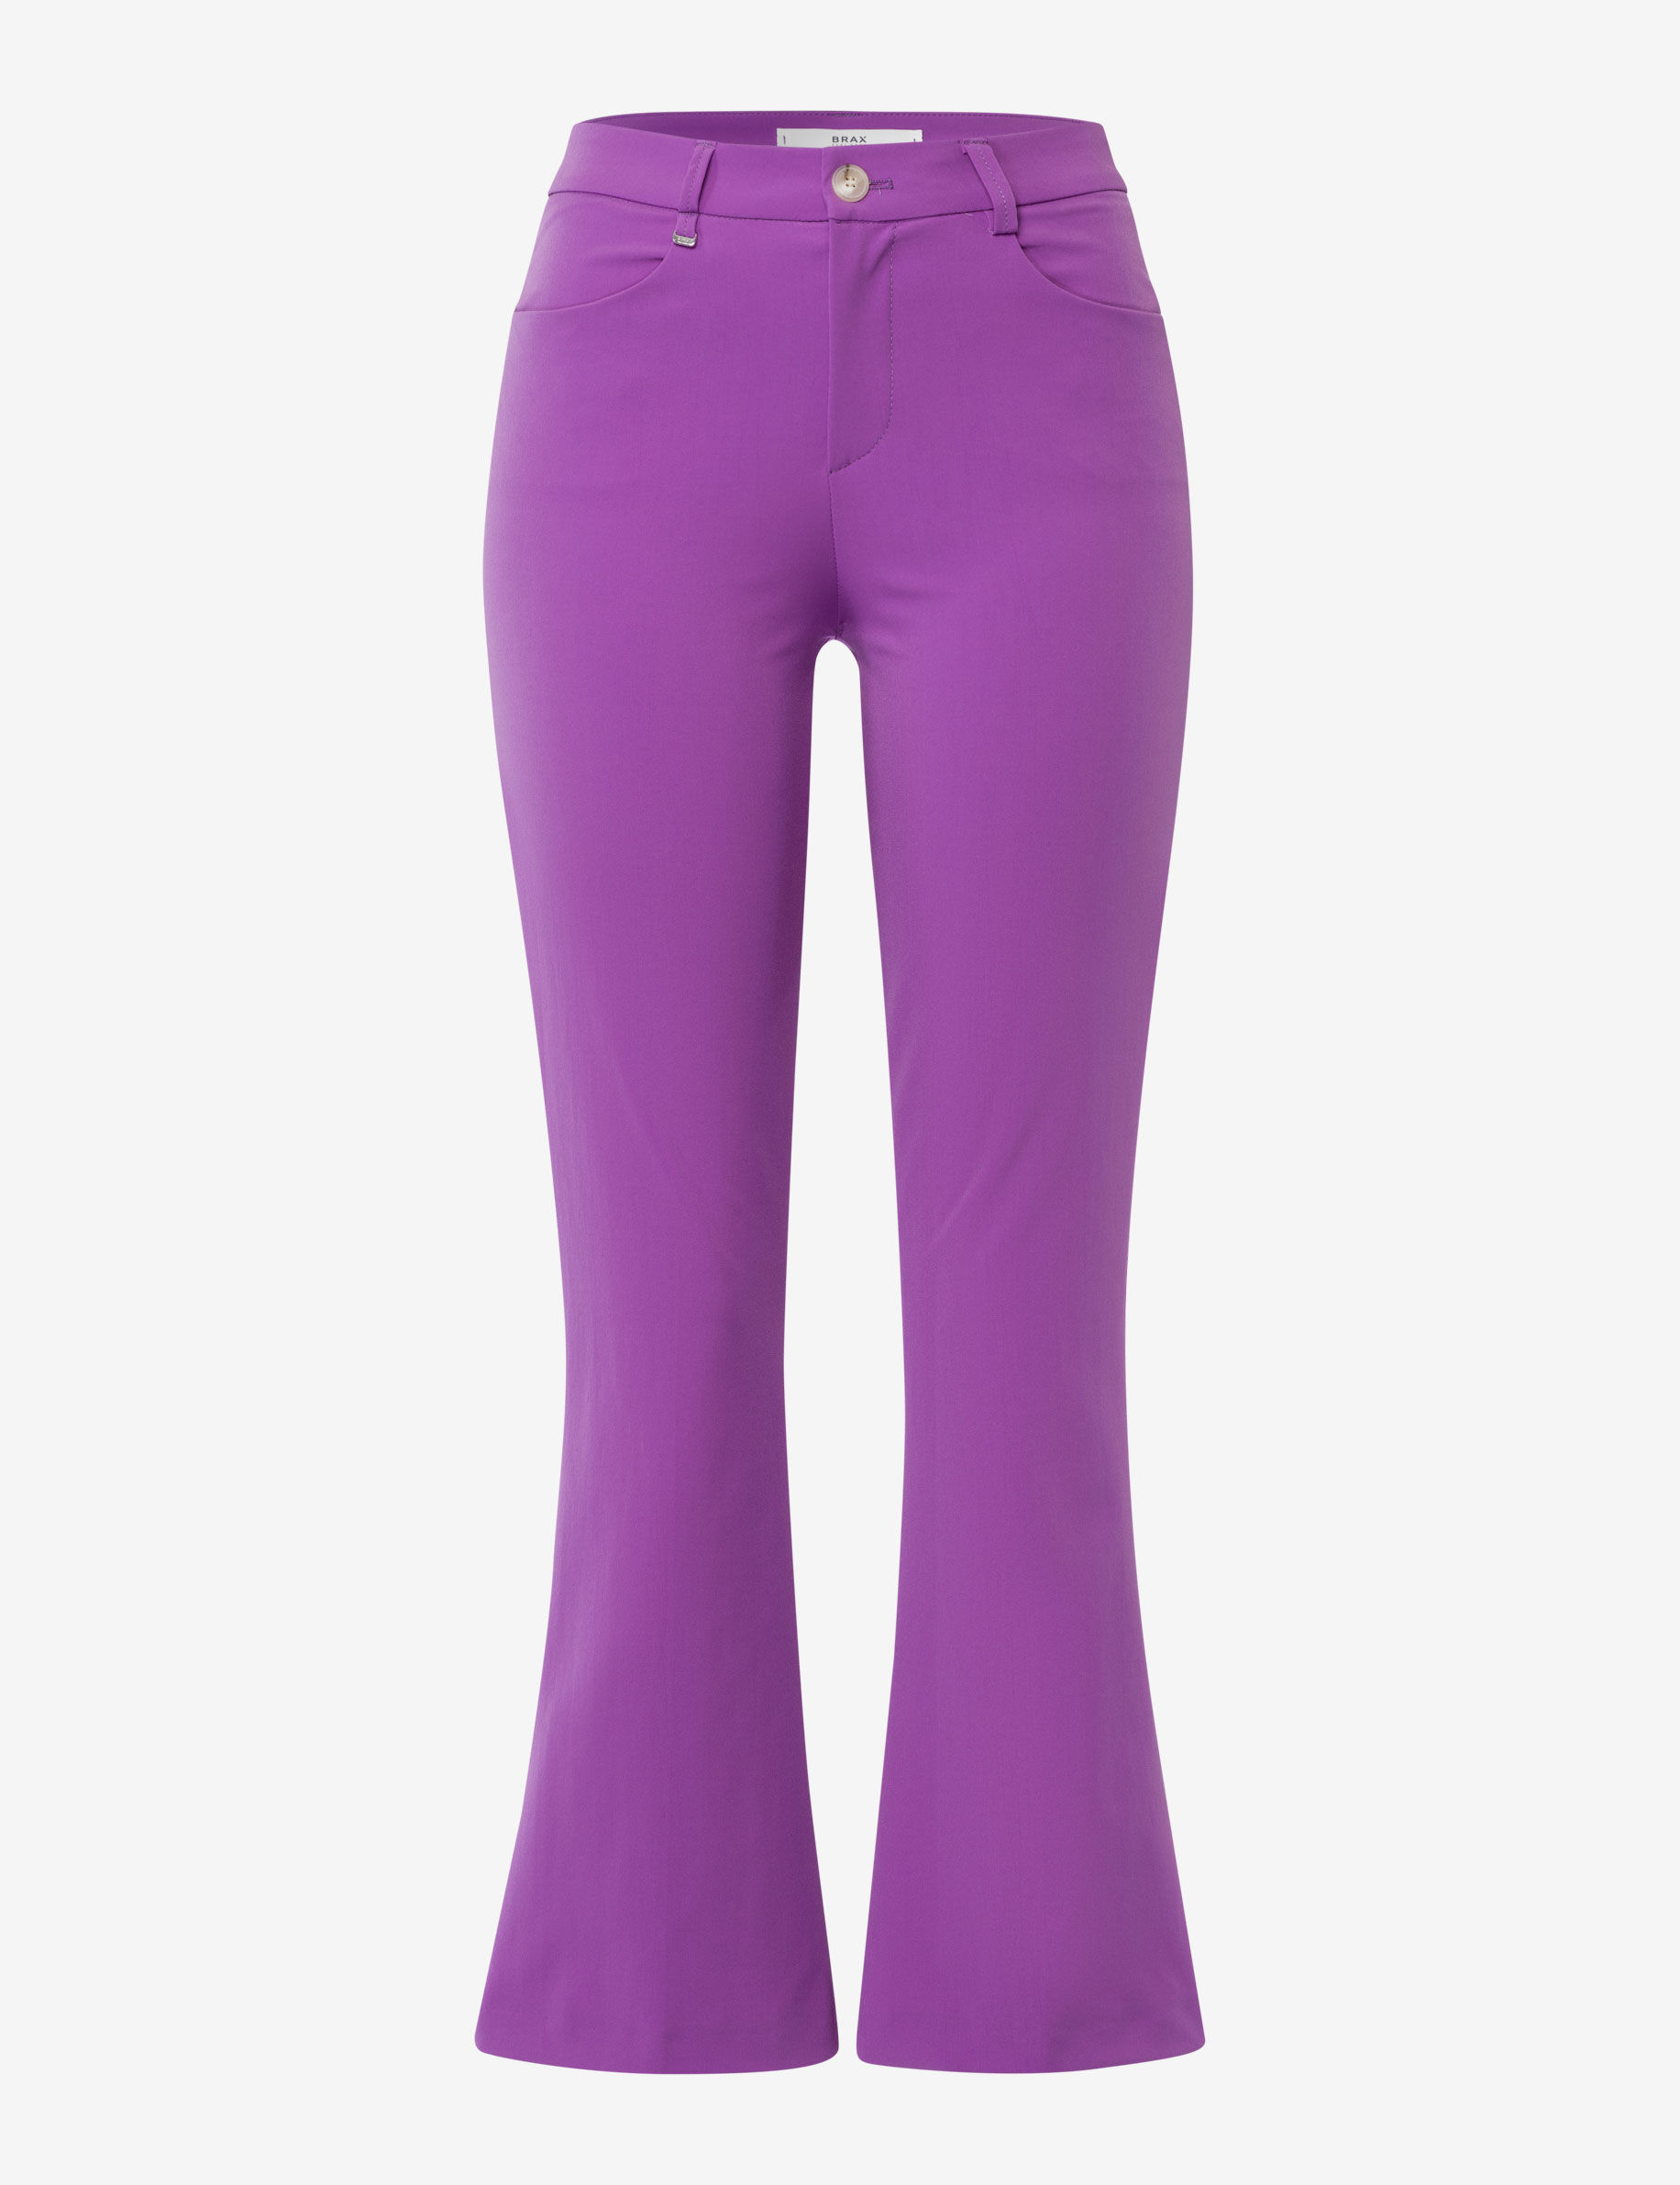 Women Style SHAKIRA S PURPLE Slim Fit Stand-alone front view